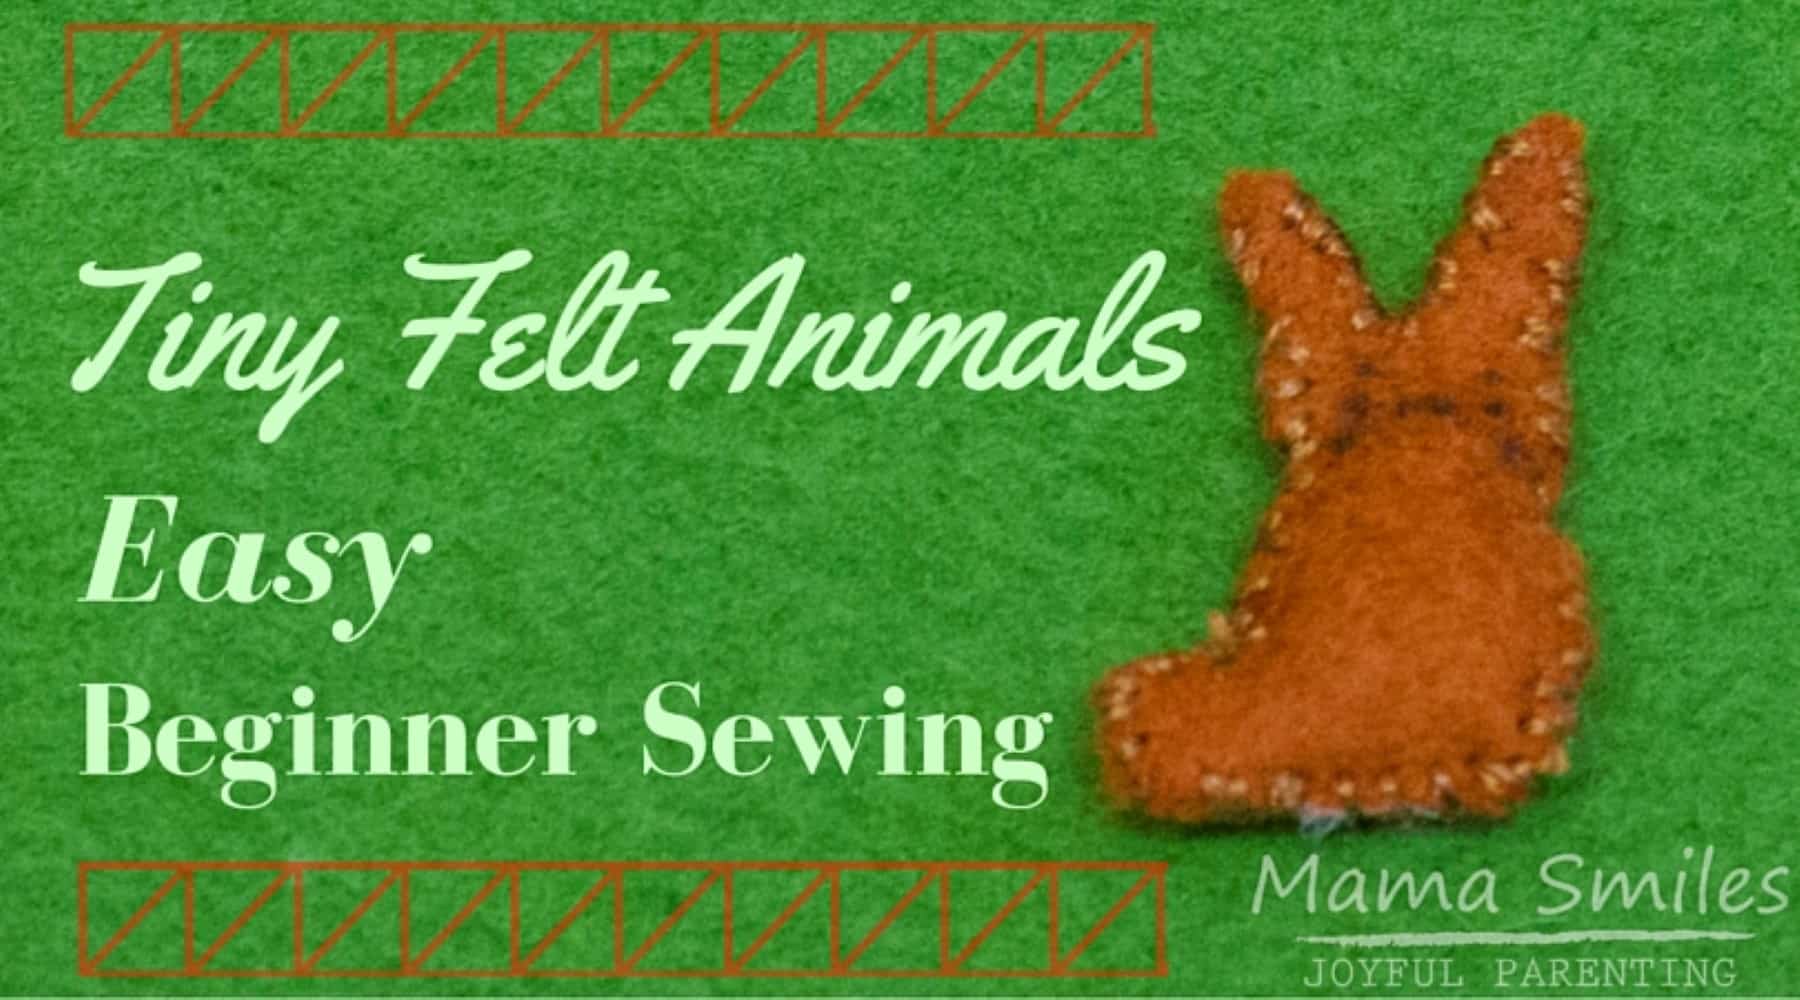 Quick and Easy Sewing Kids Love: 3 Tiny Felt Animals